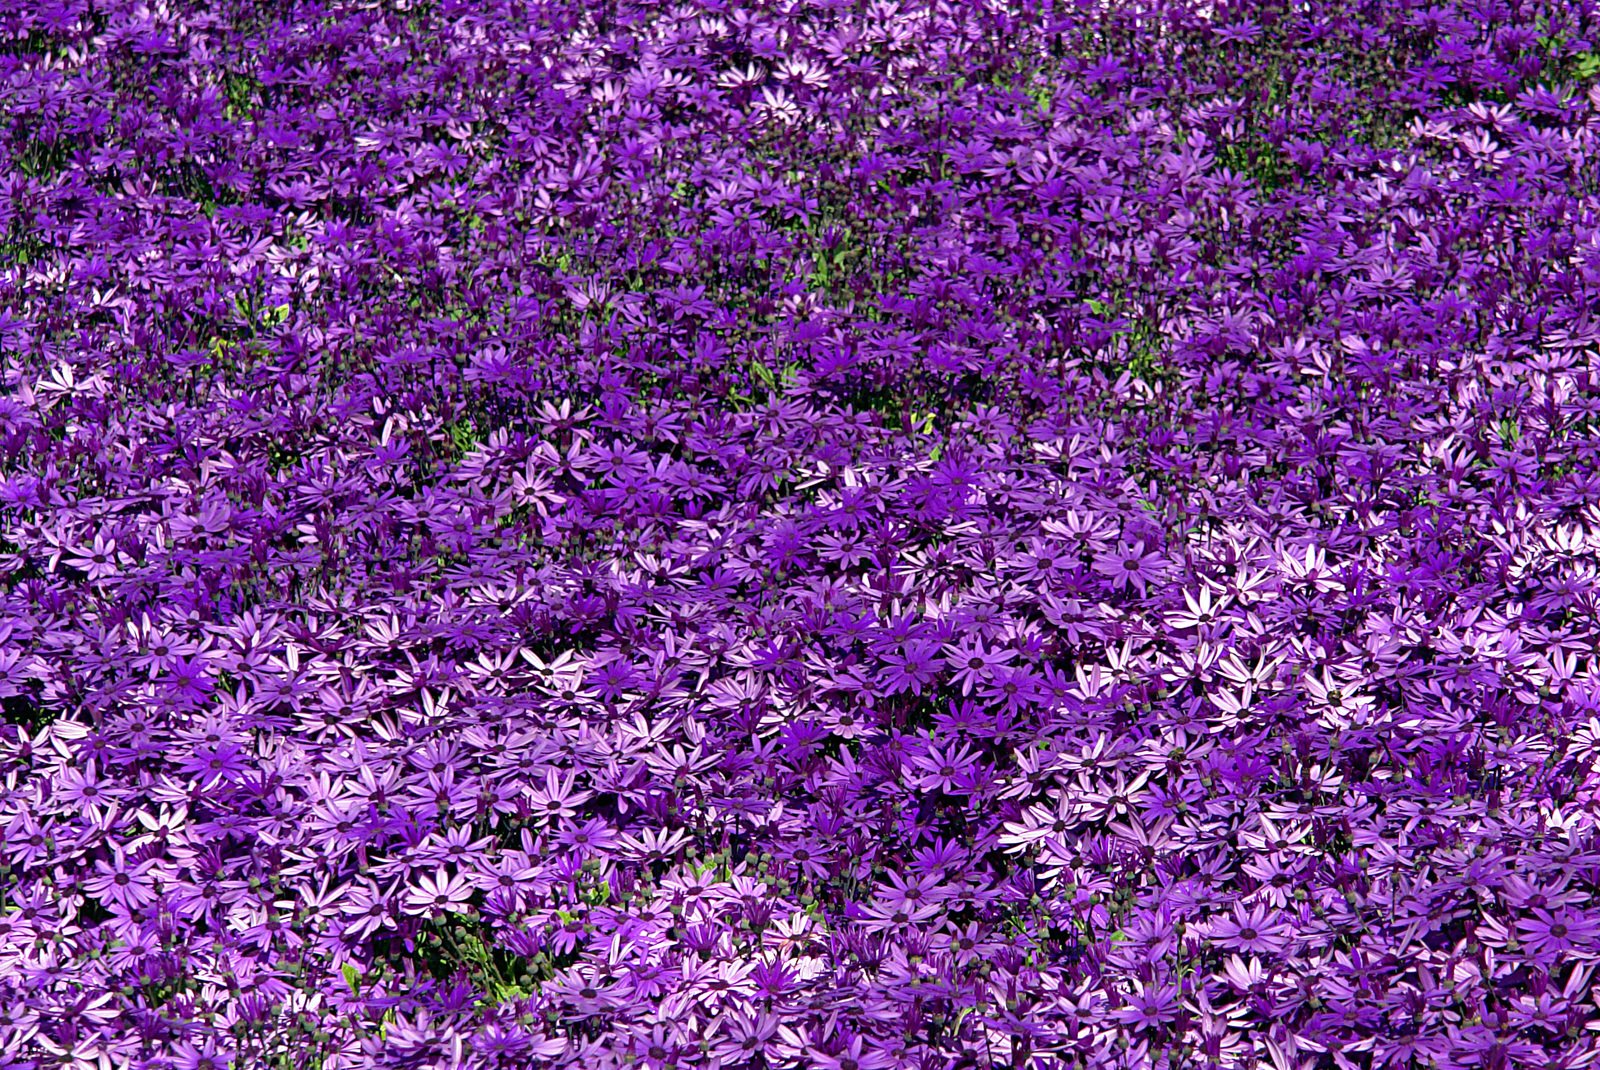 a field filled with lots of purple flowers